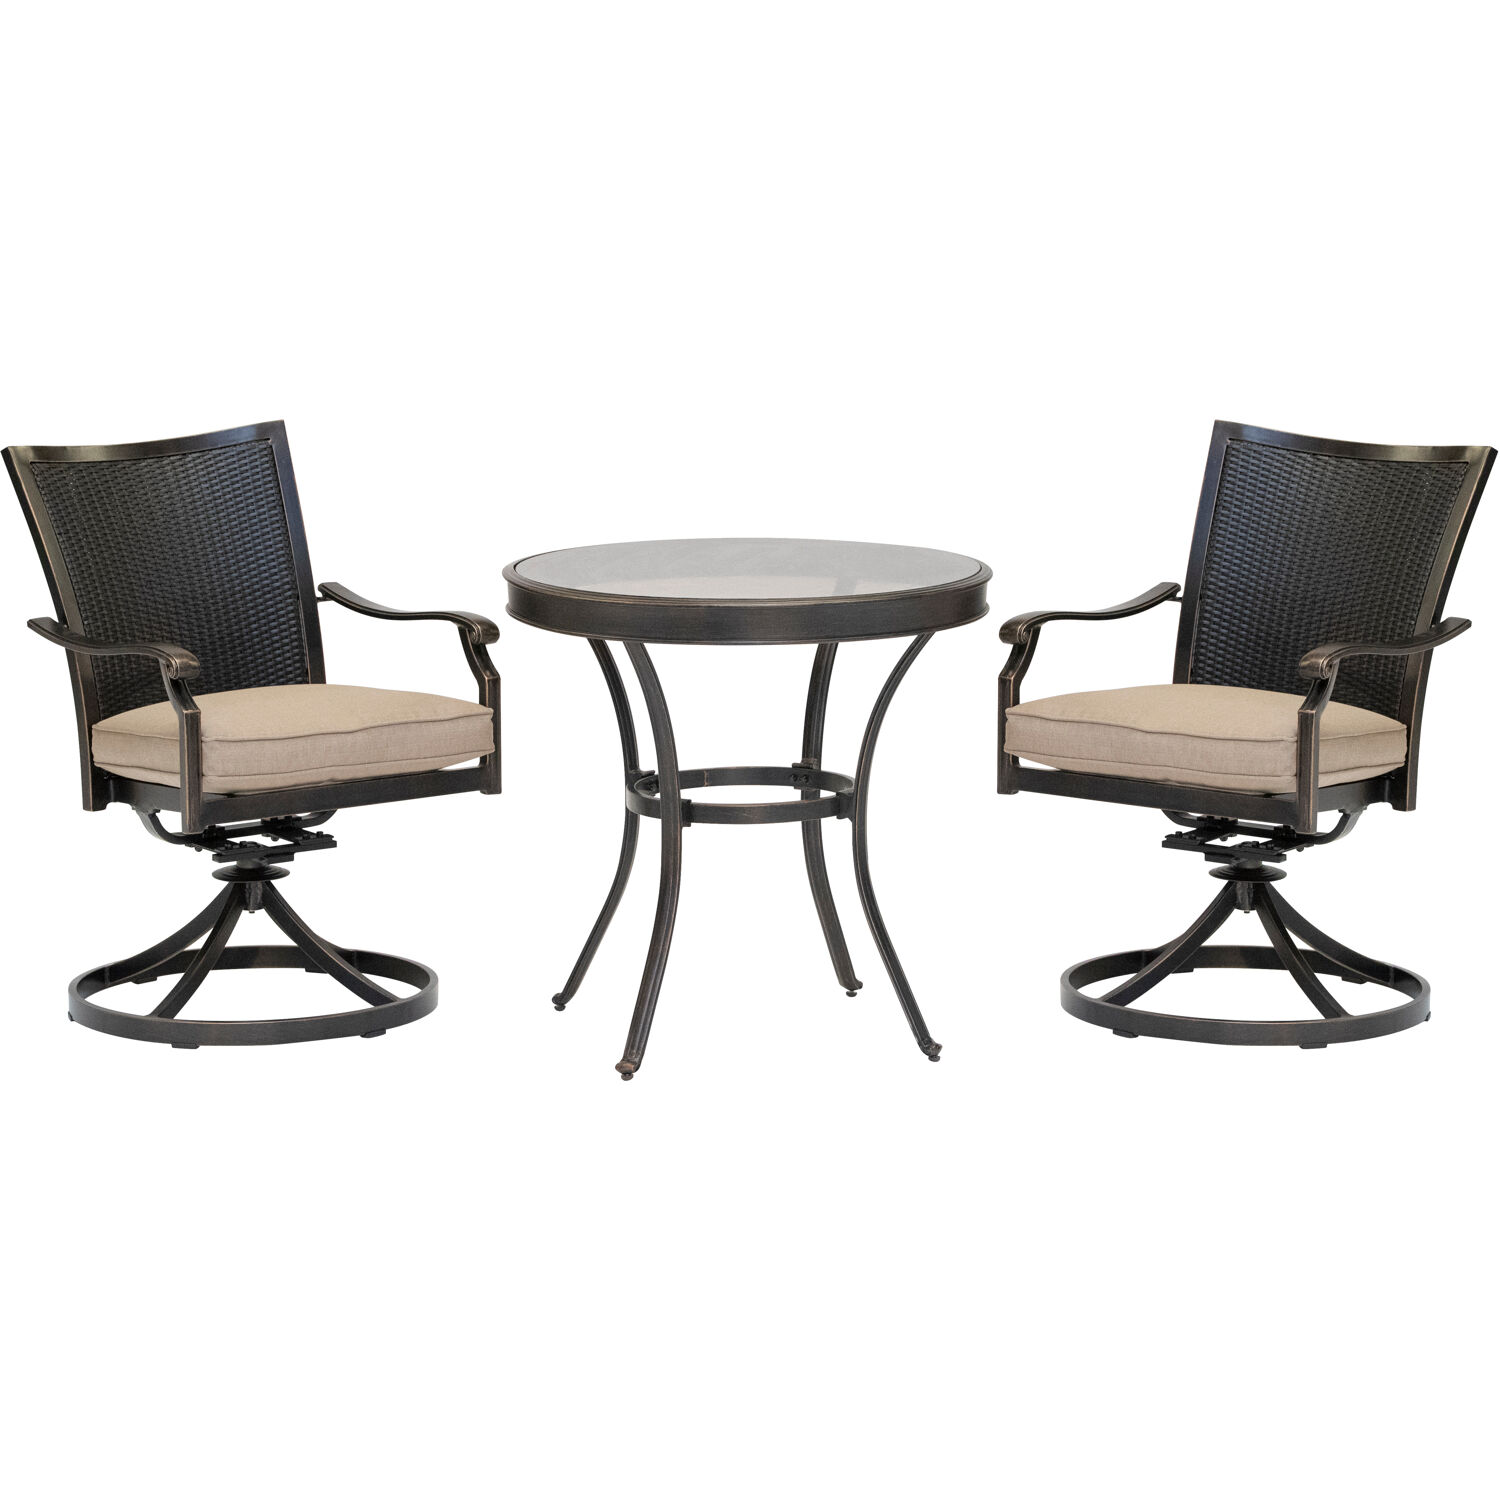 Hanover Traditions 3-Piece Outdoor Patio Bistro Set, 2 Aluminum Chairs and 30" Round Glass Table - image 1 of 9